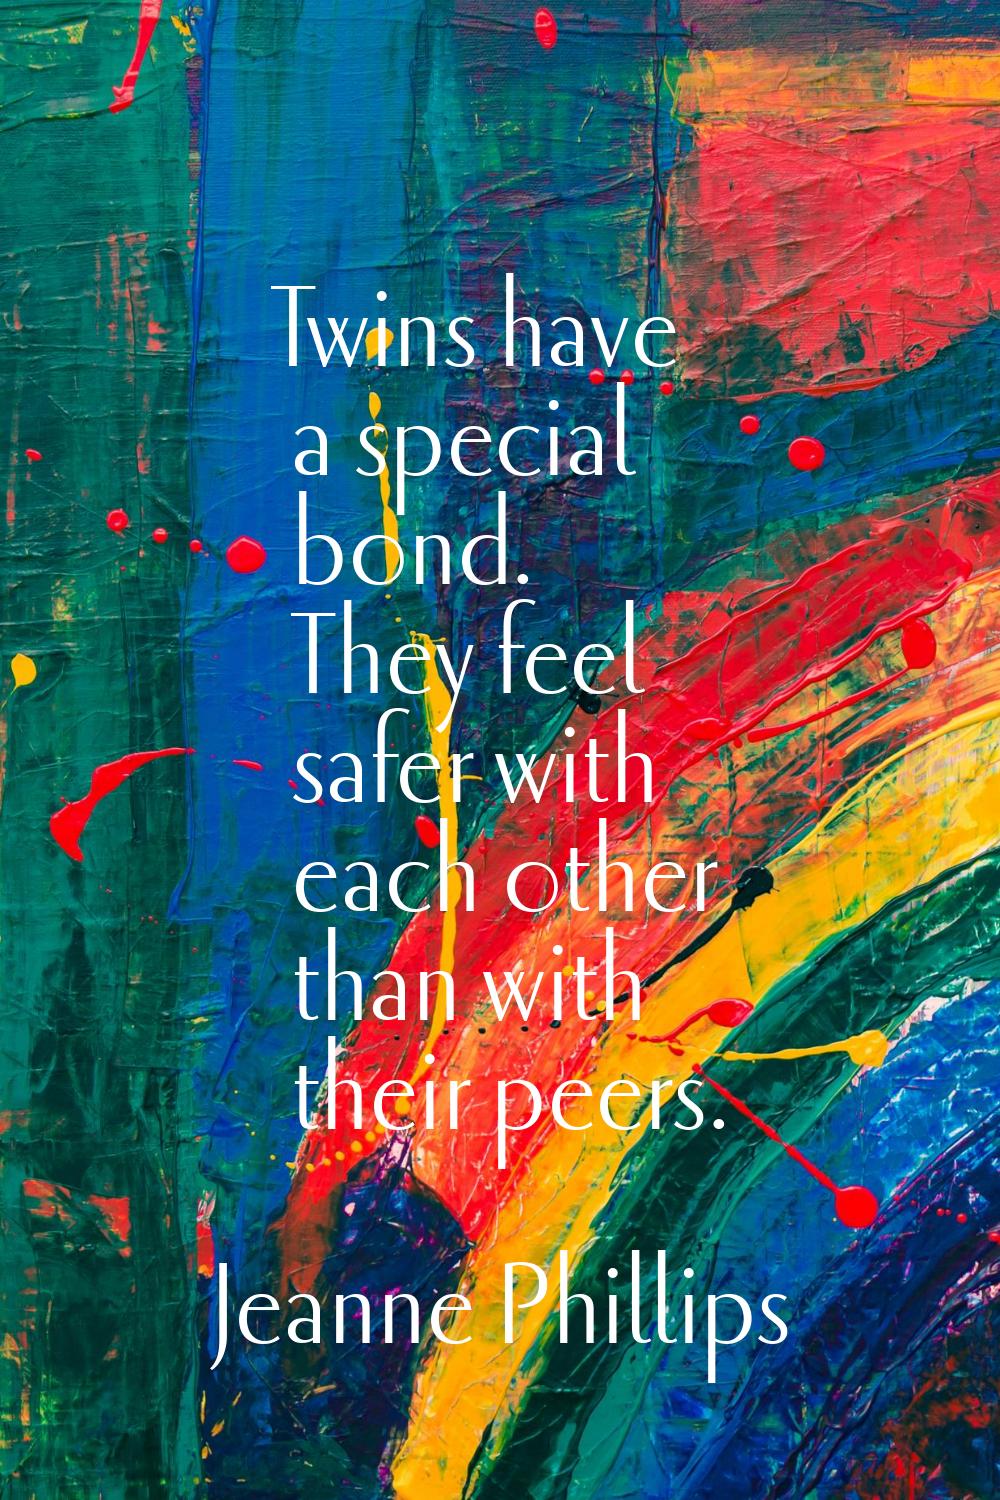 Twins have a special bond. They feel safer with each other than with their peers.